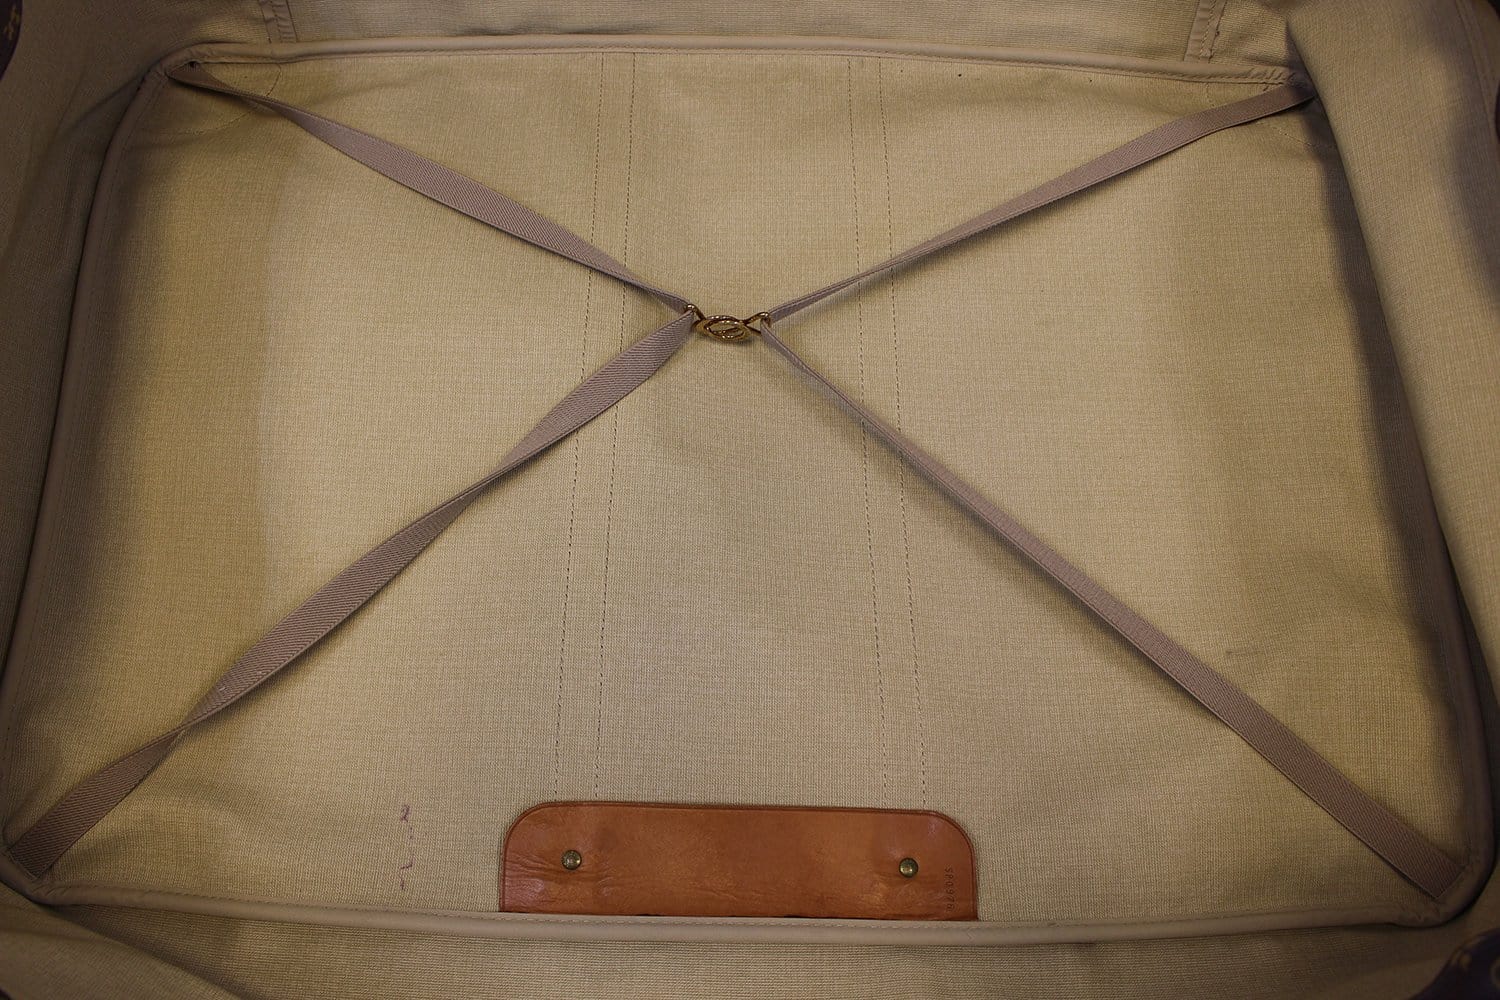 A BROWN MONOGRAM CANVAS SIRIUS 70 WITH GOLD HARDWARE, LOUIS VUITTON, 2005